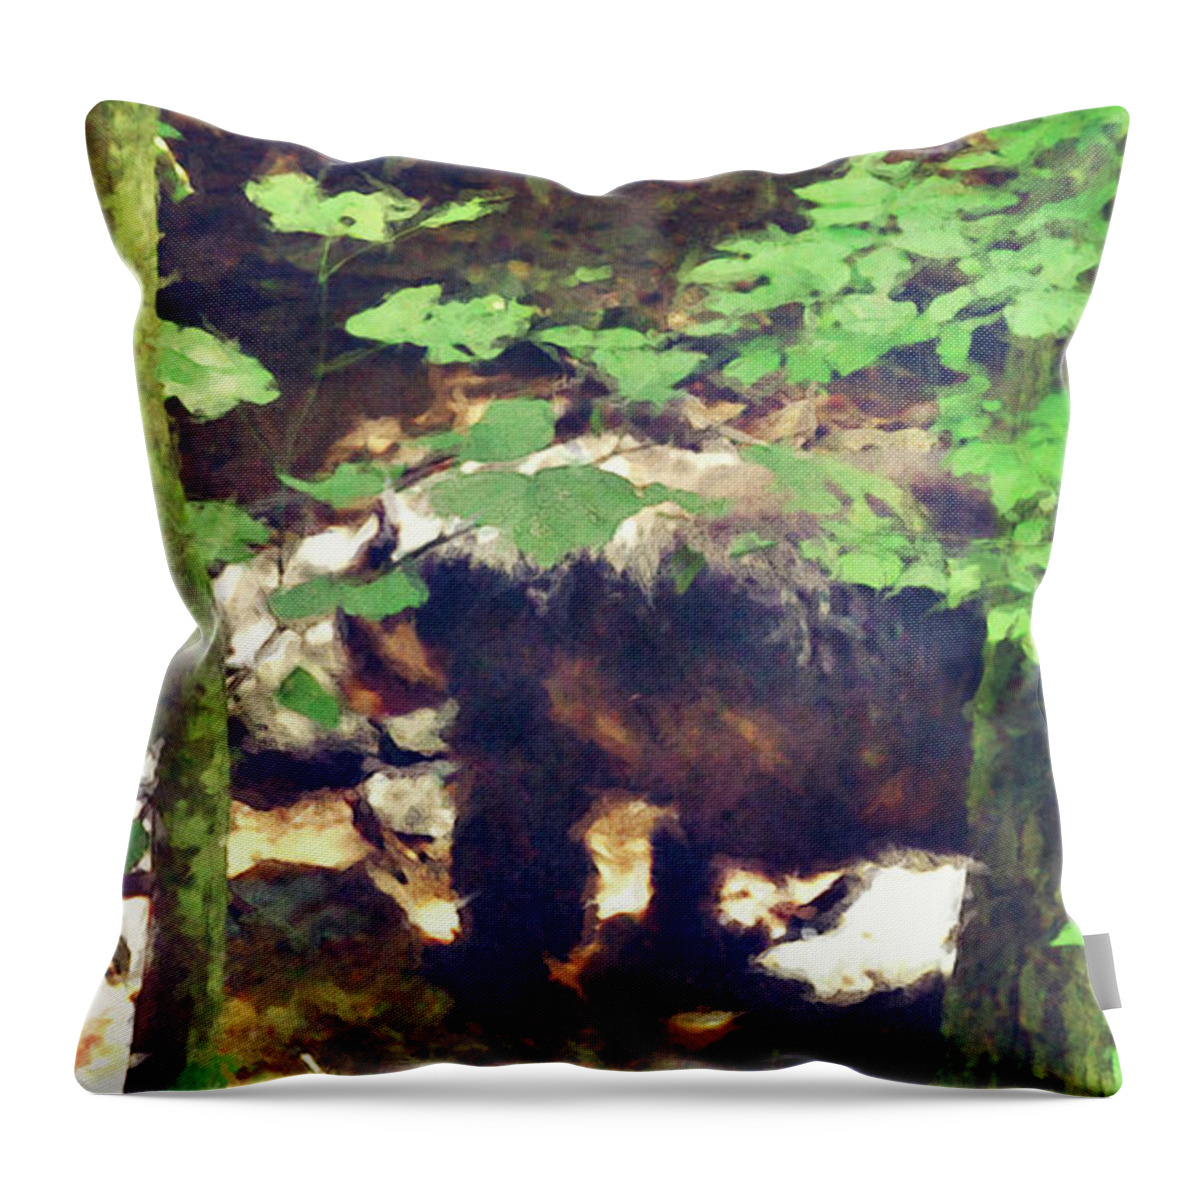 Bear Throw Pillow featuring the digital art Black Bear In Woods by Phil Perkins